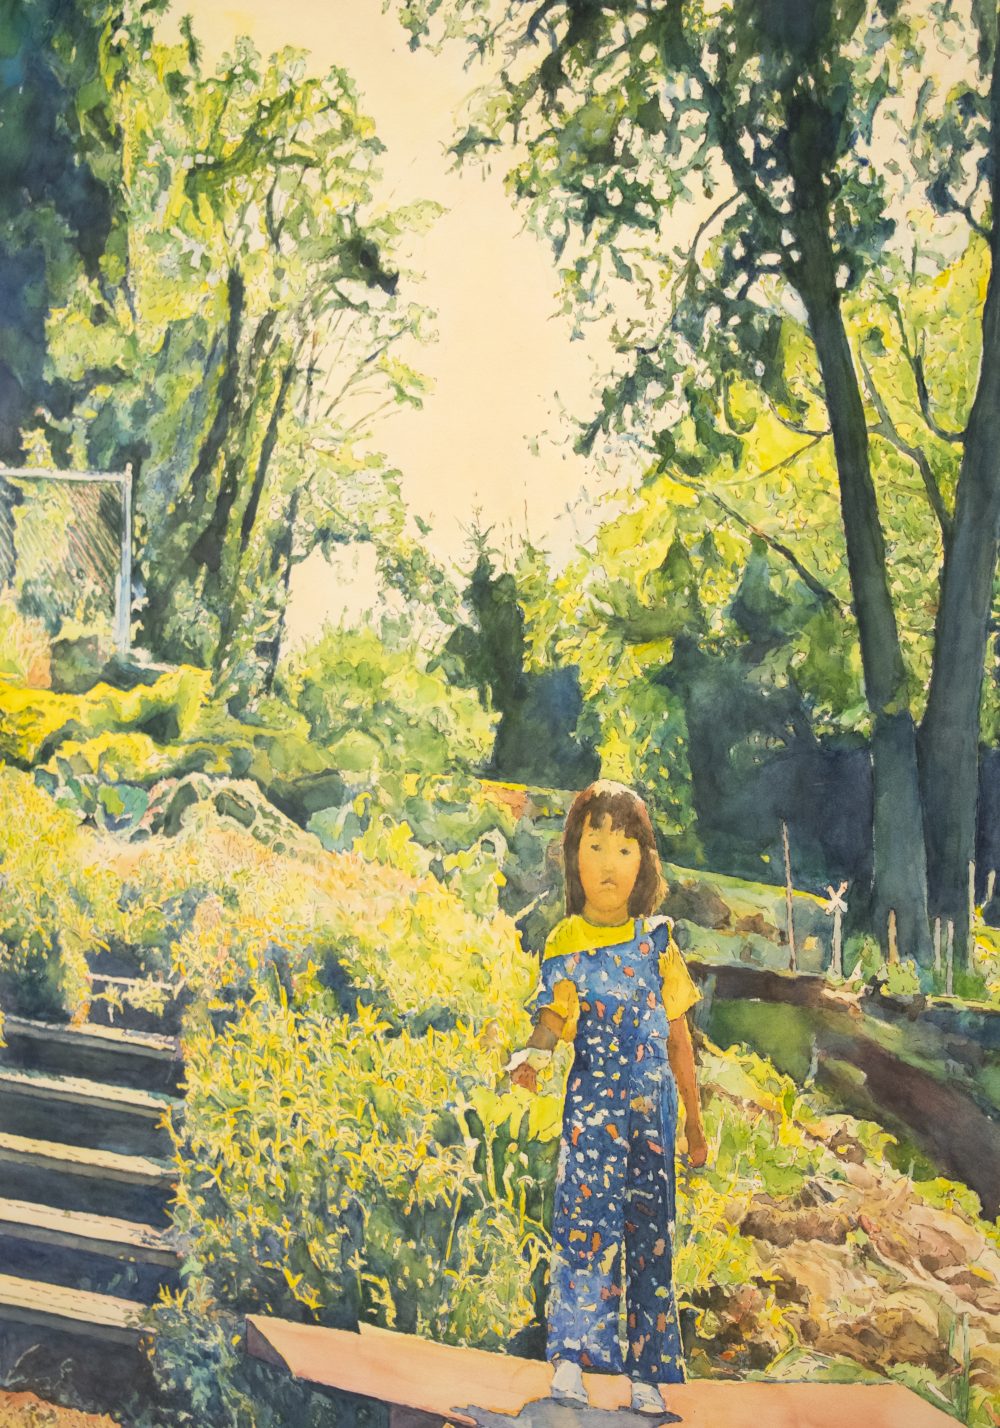 Watercolor painting of young girl standing in garden, with steps on the left side, rocks on the right, flowers and trees around and above her. Blue, yellow and green are predominant colors.